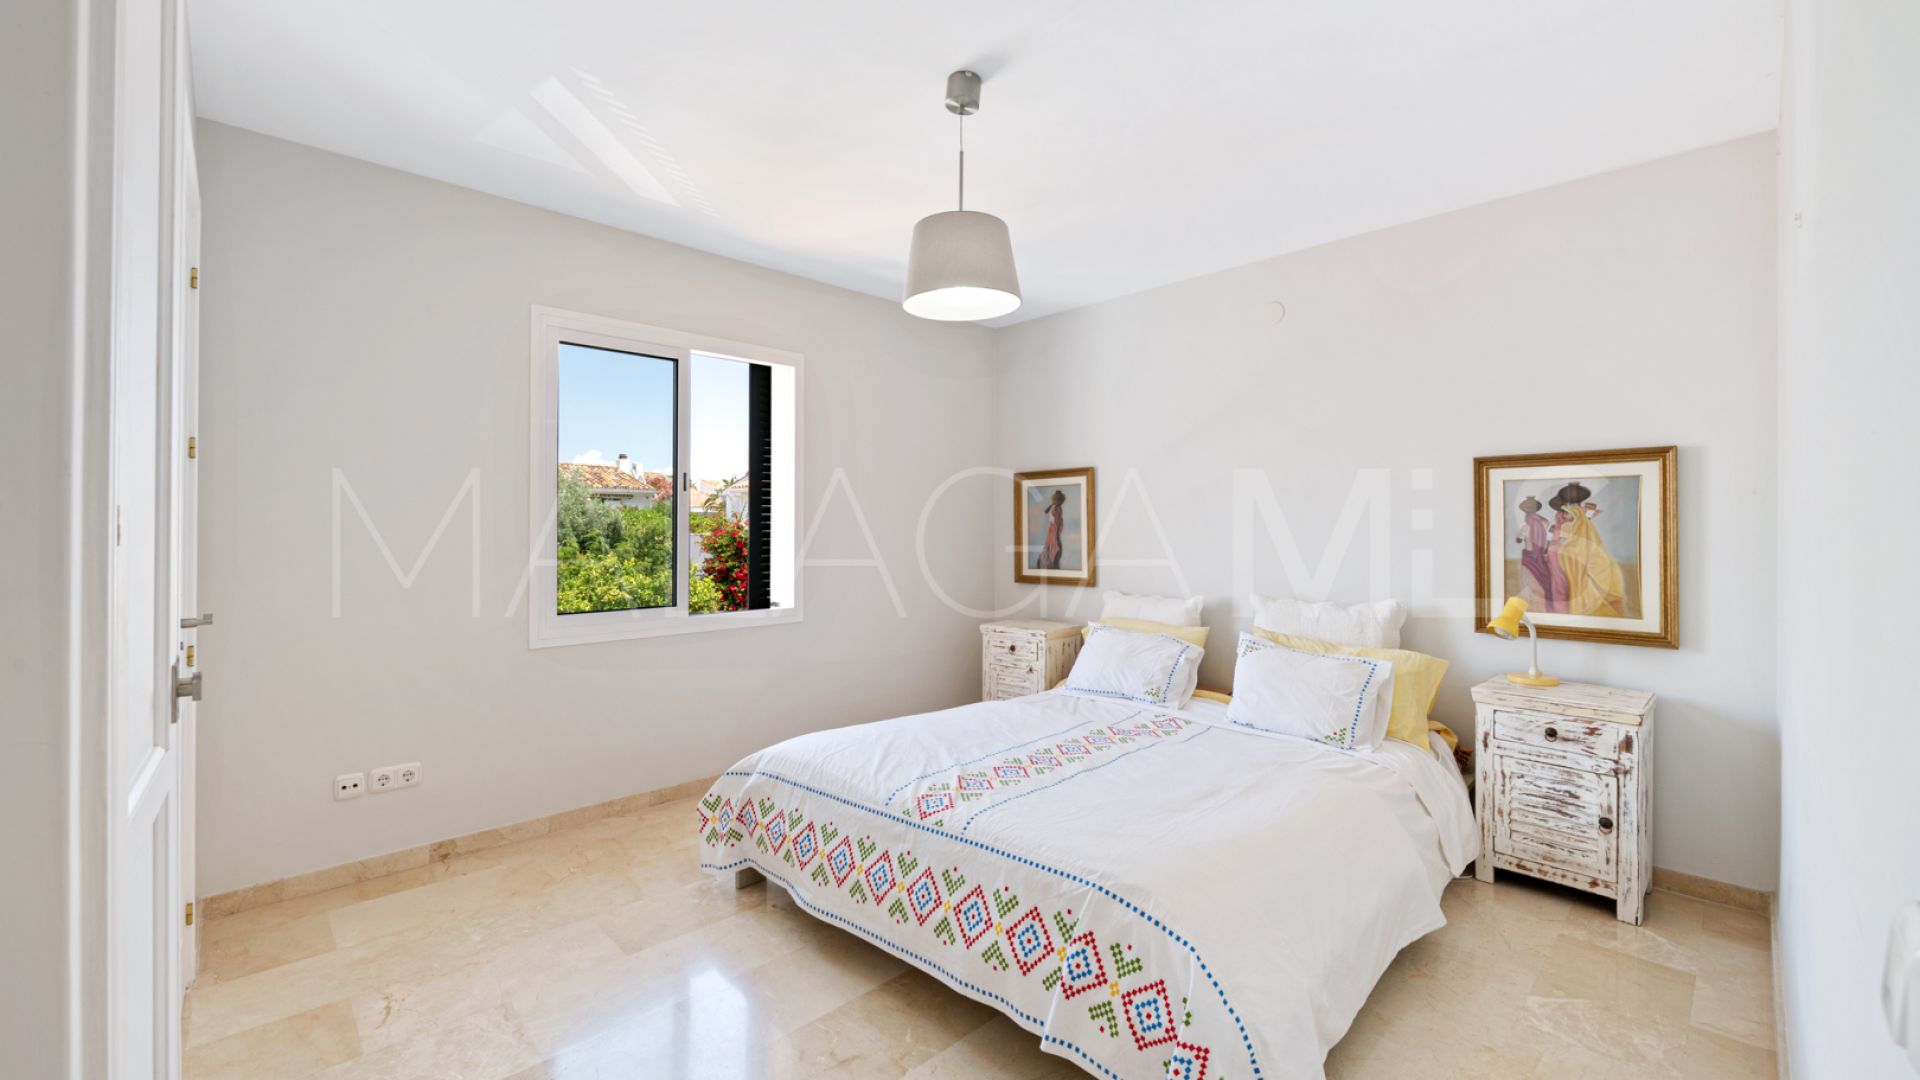 4 bedrooms semi detached house in San Pedro Playa for sale